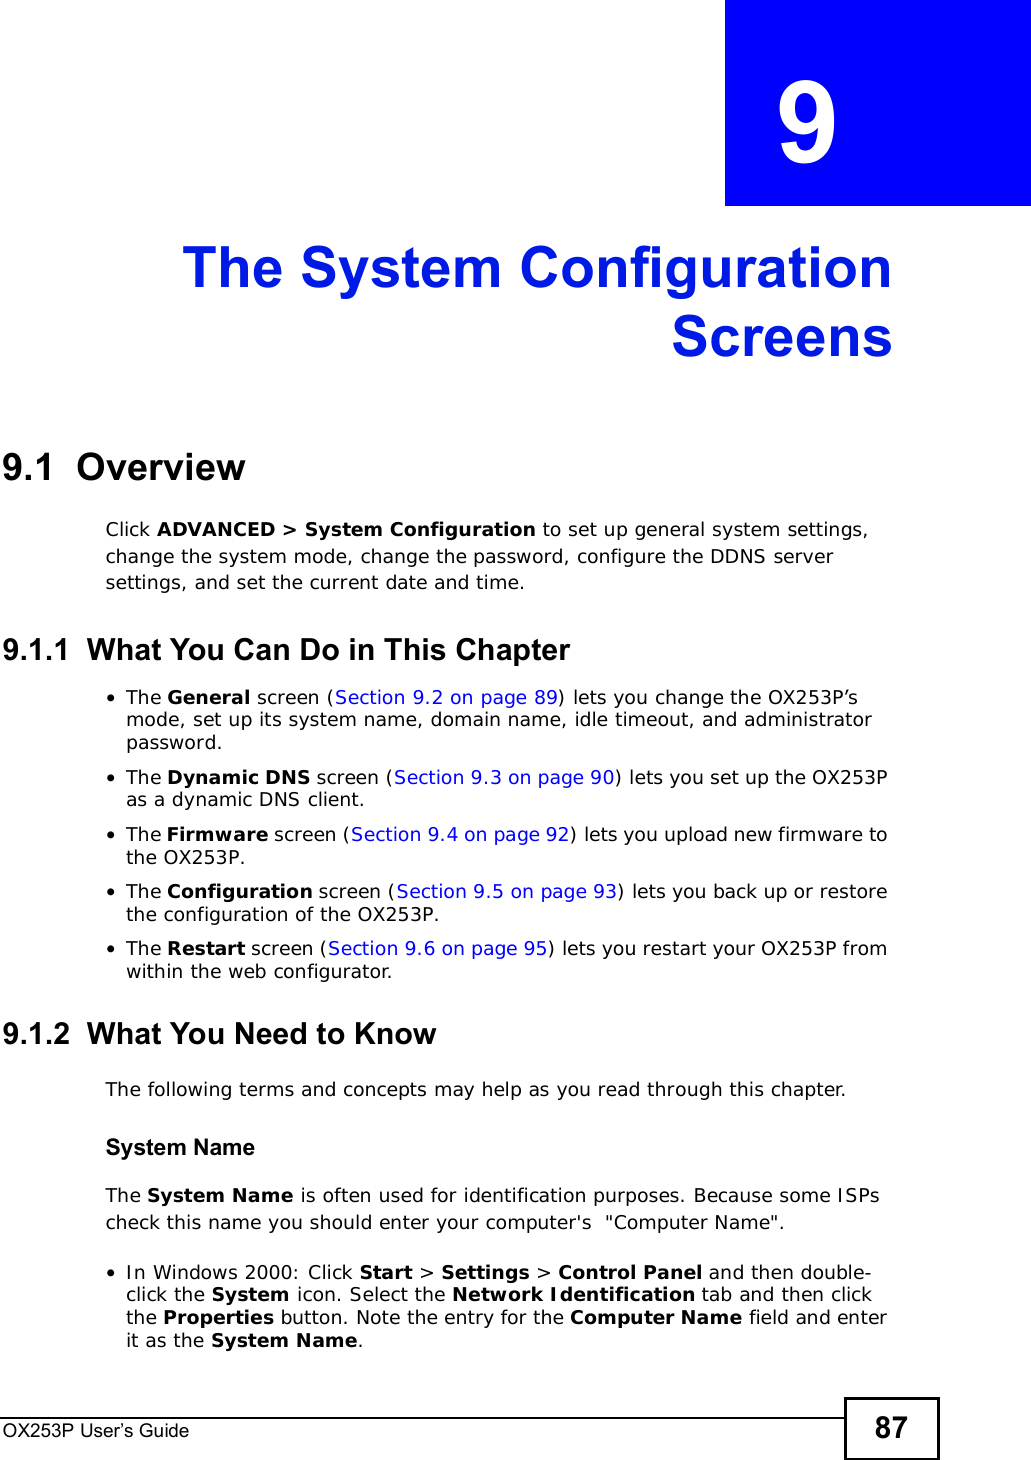 OX253P User’s Guide 87CHAPTER  9 The System ConfigurationScreens9.1  OverviewClick ADVANCED &gt; System Configuration to set up general system settings, change the system mode, change the password, configure the DDNS server settings, and set the current date and time.9.1.1  What You Can Do in This Chapter•The General screen (Section 9.2 on page 89) lets you change the OX253P’s mode, set up its system name, domain name, idle timeout, and administrator password.•The Dynamic DNS screen (Section 9.3 on page 90) lets you set up the OX253P as a dynamic DNS client.•The Firmware screen (Section 9.4 on page 92) lets you upload new firmware to the OX253P.•The Configuration screen (Section 9.5 on page 93) lets you back up or restore the configuration of the OX253P.•The Restart screen (Section 9.6 on page 95) lets you restart your OX253P from within the web configurator.9.1.2  What You Need to KnowThe following terms and concepts may help as you read through this chapter.System NameThe System Name is often used for identification purposes. Because some ISPs check this name you should enter your computer&apos;s  &quot;Computer Name&quot;. •In Windows 2000: Click Start &gt; Settings &gt; Control Panel and then double-click the System icon. Select the Network Identification tab and then click the Properties button. Note the entry for the Computer Name field and enter it as the System Name.